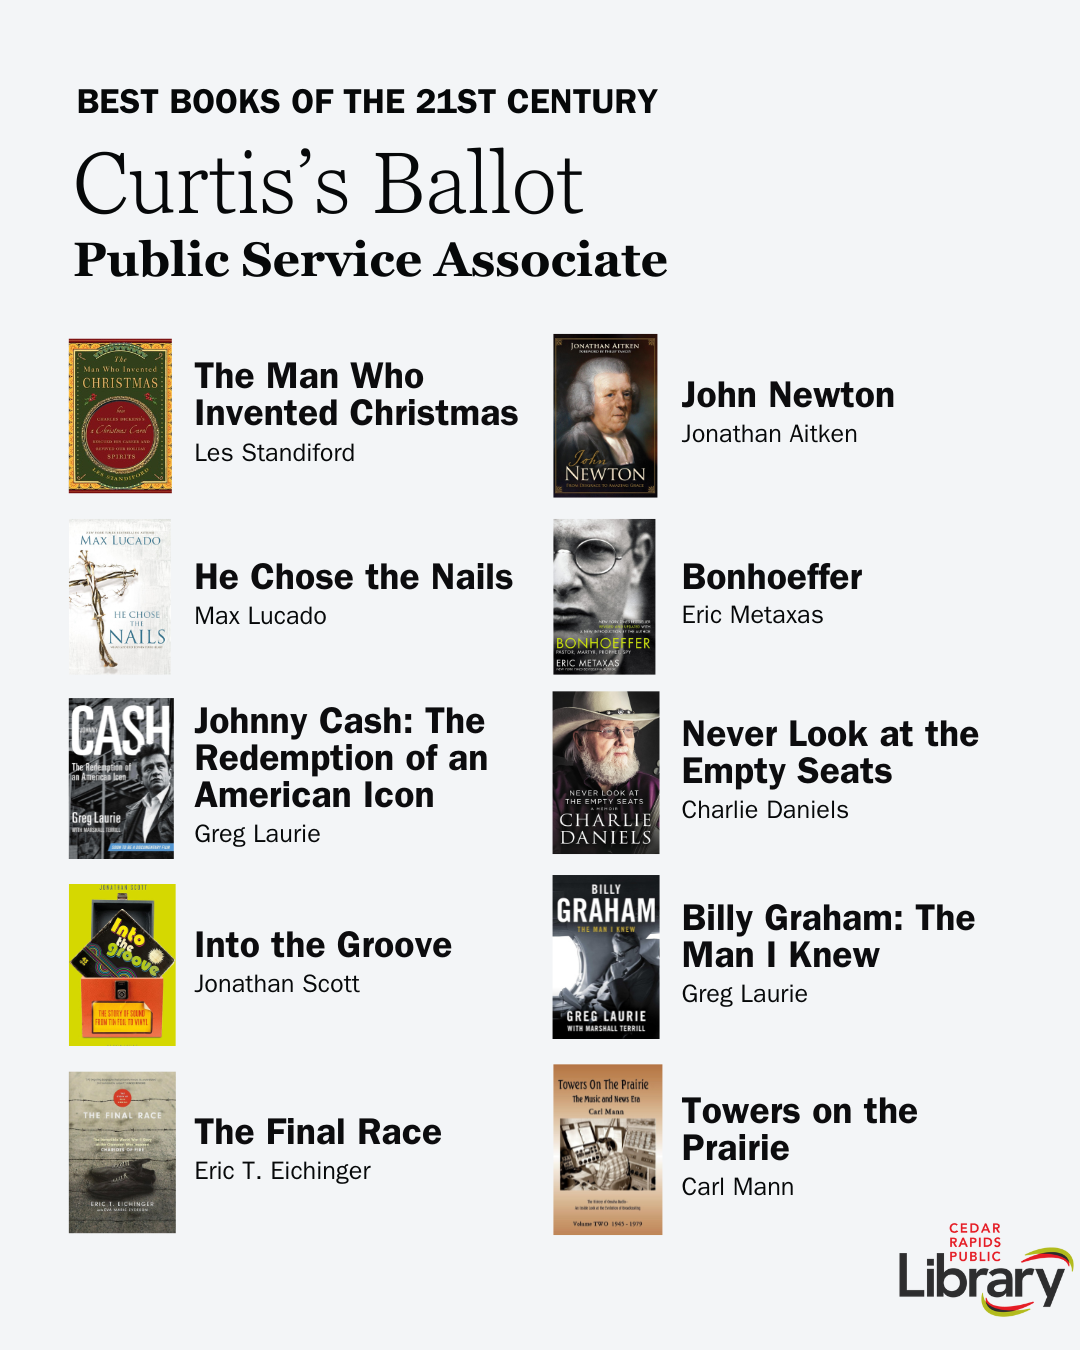 A graphic shows Public Service Associate Curtis's Ballot for Best Books of the 21st Century